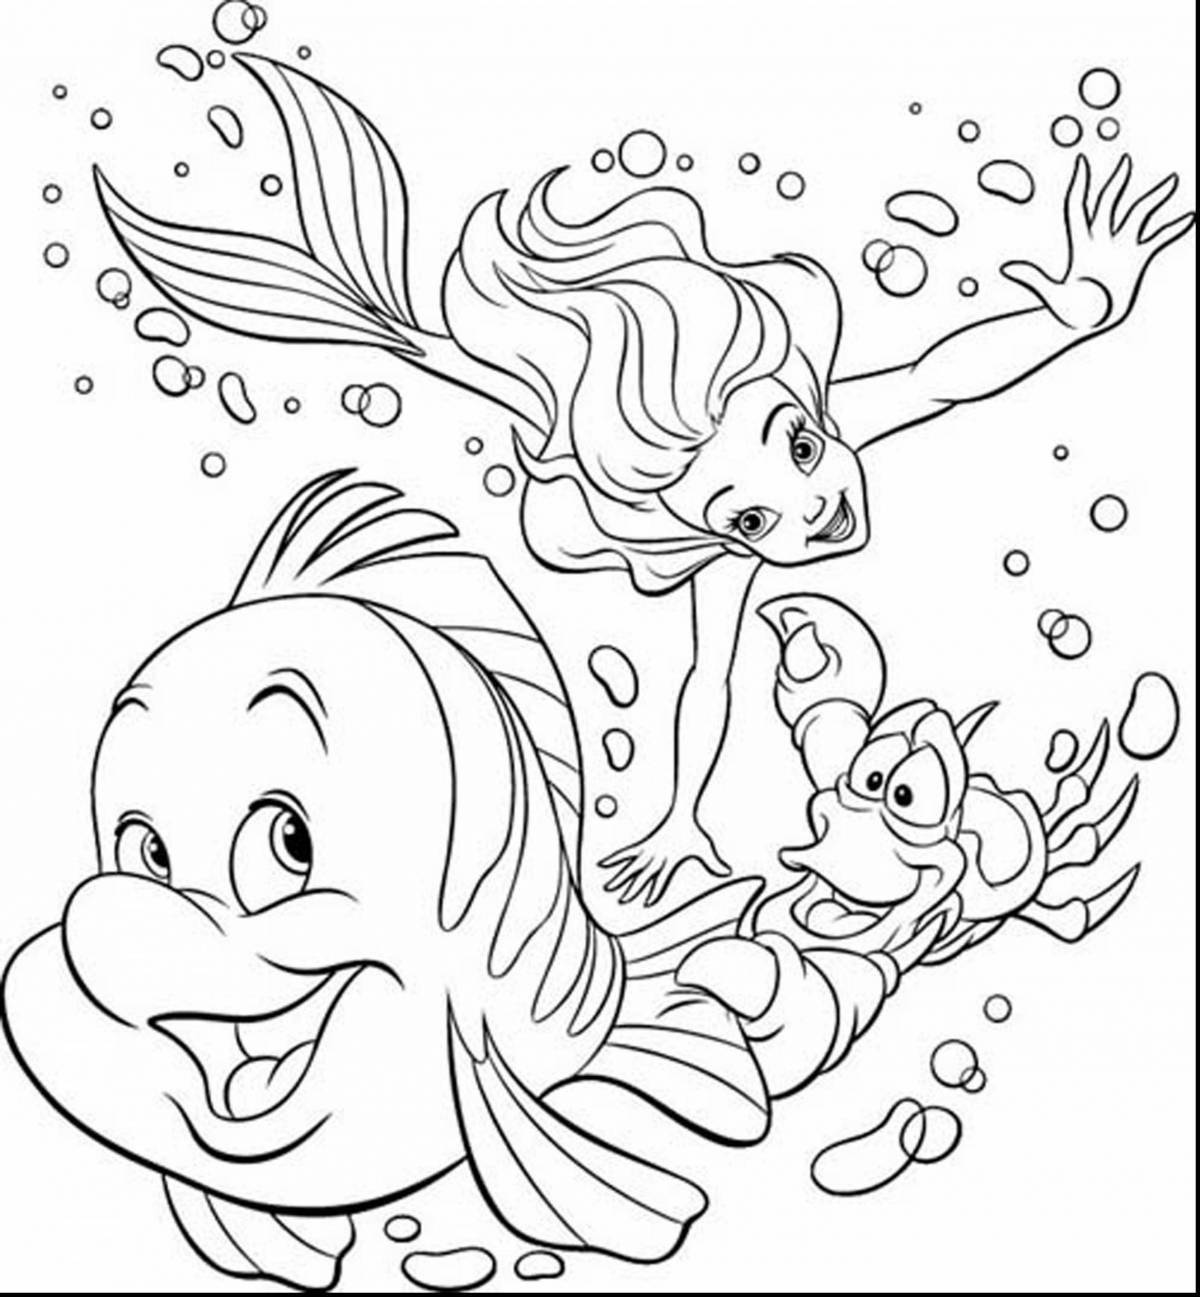 Colorful cartoon characters coloring book for 6-7 year olds